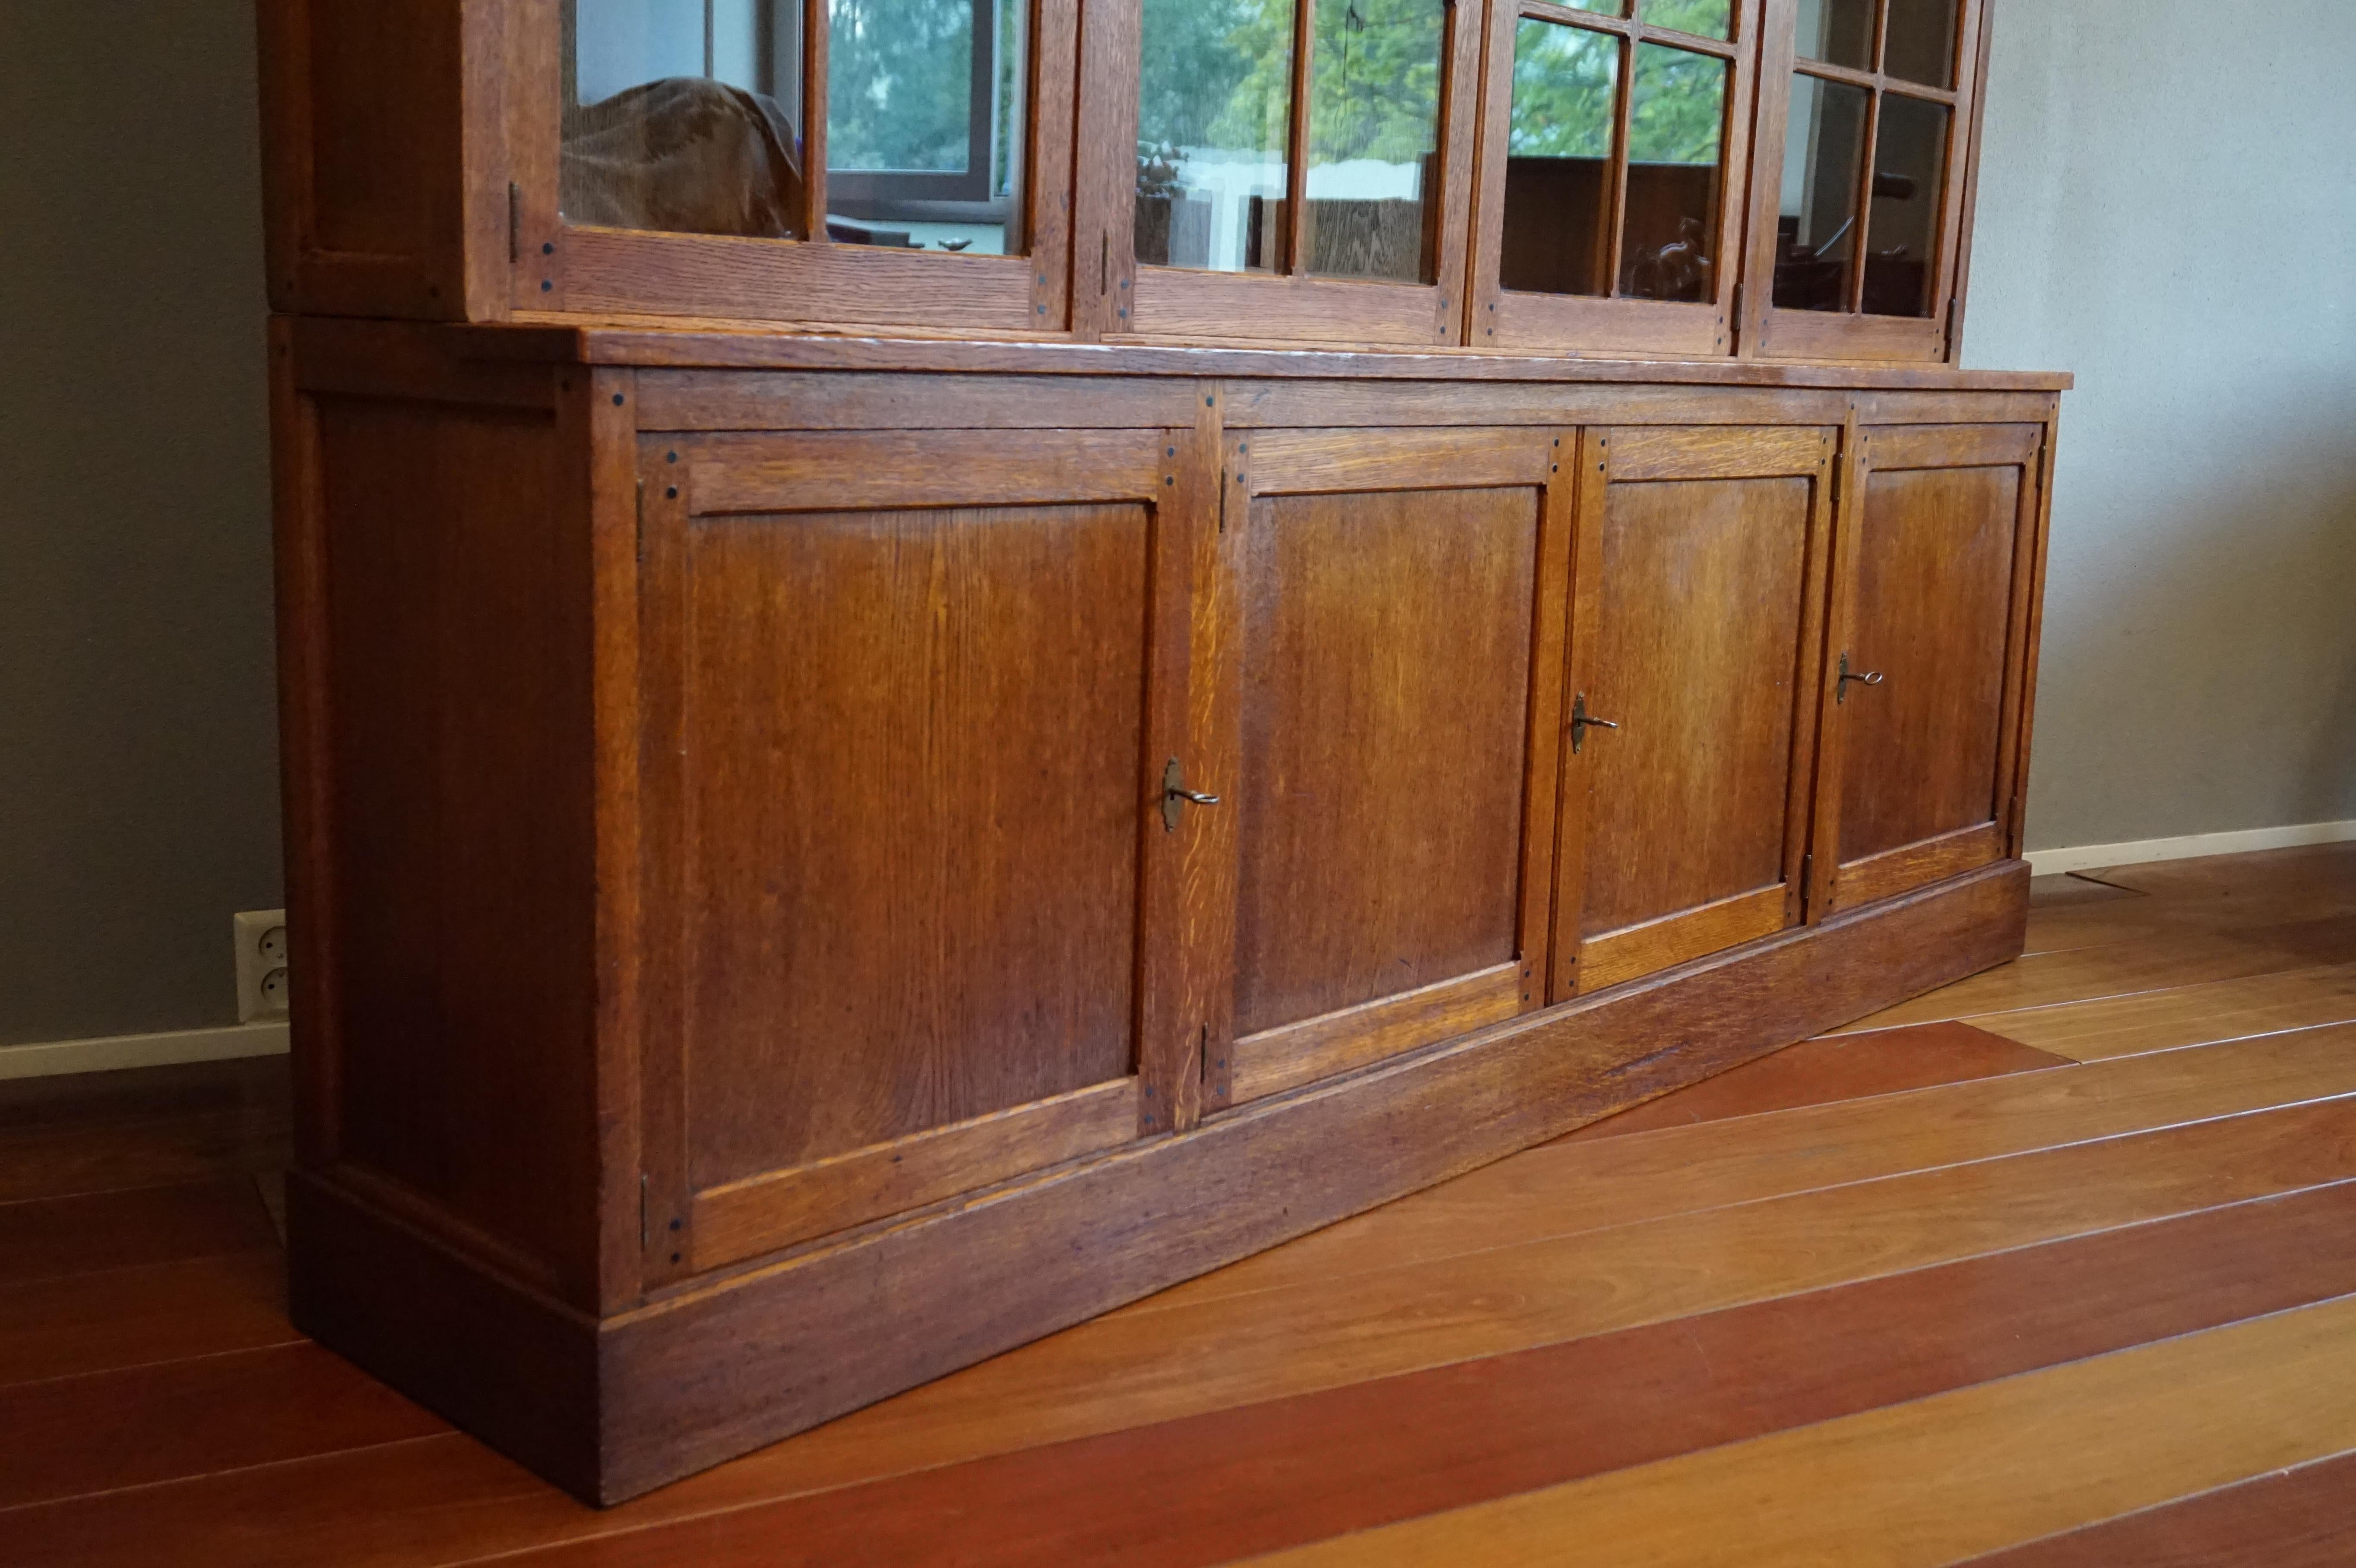 Arts and Crafts Rare & Important Dutch Arts & Crafts Oak Bookcase By Architect H.P. Berlage